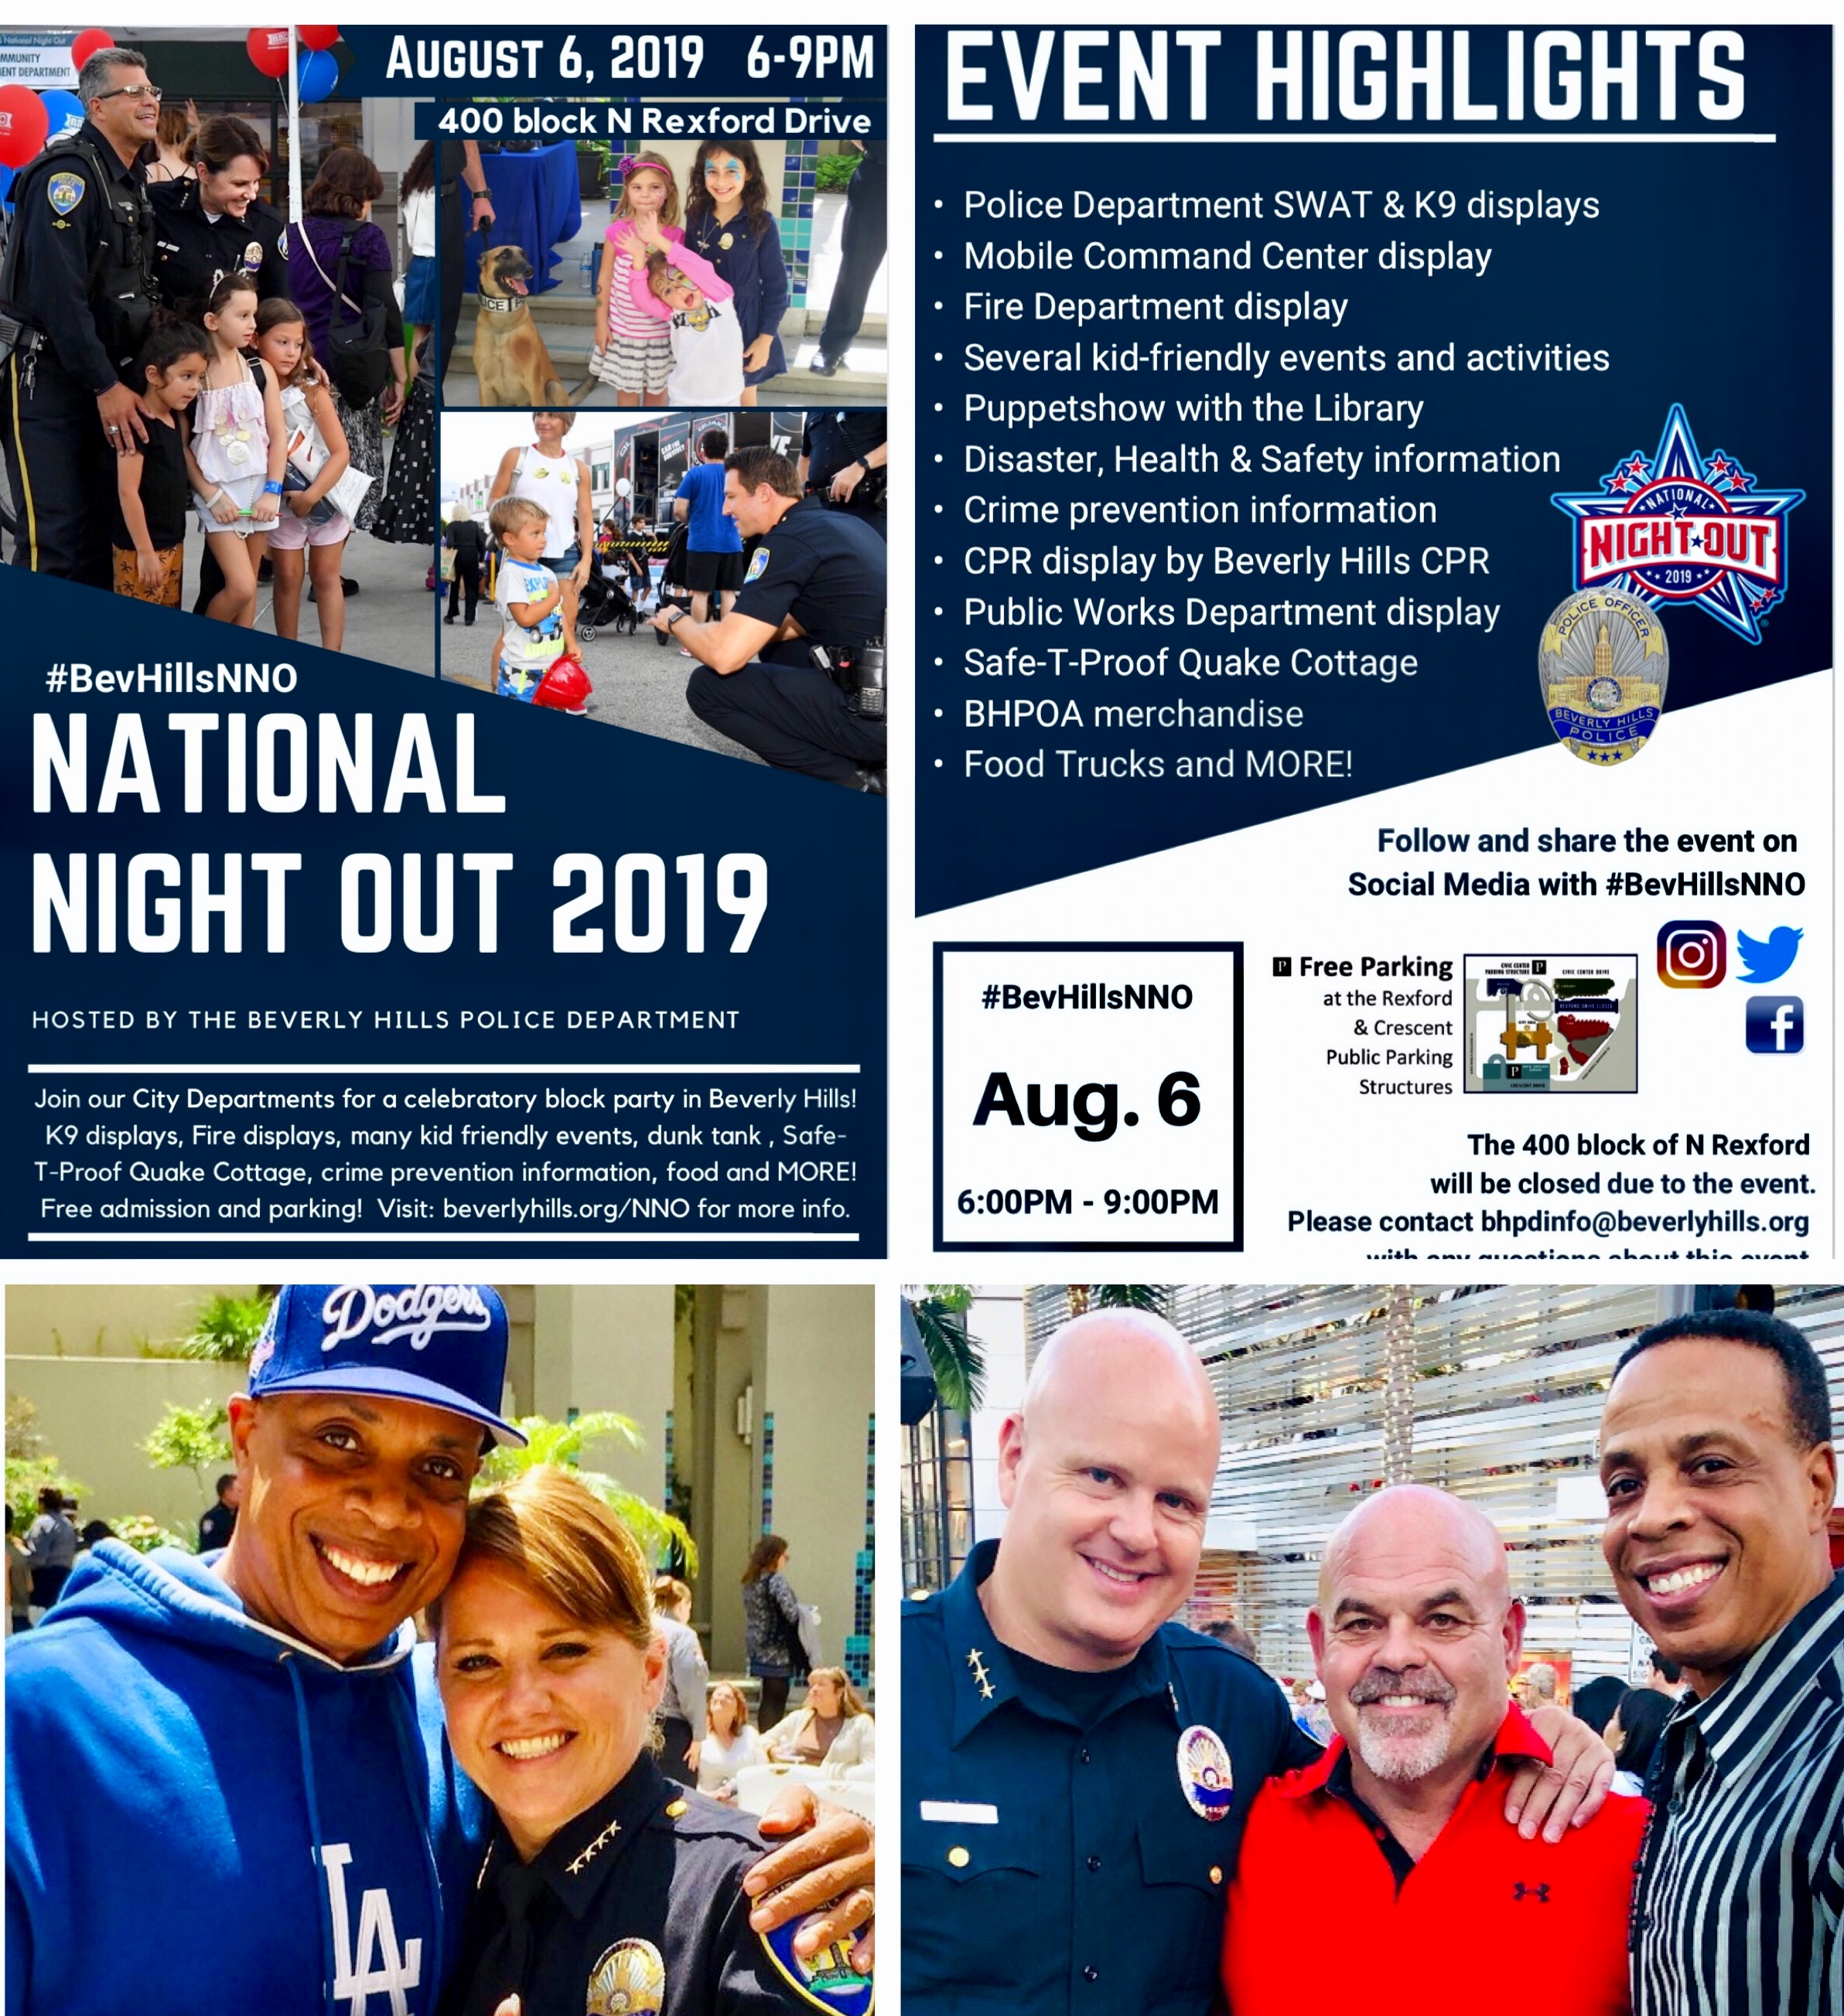 The Charity Fitness Tour rolled to The Beverly Hills Police Department’s National Night Out!